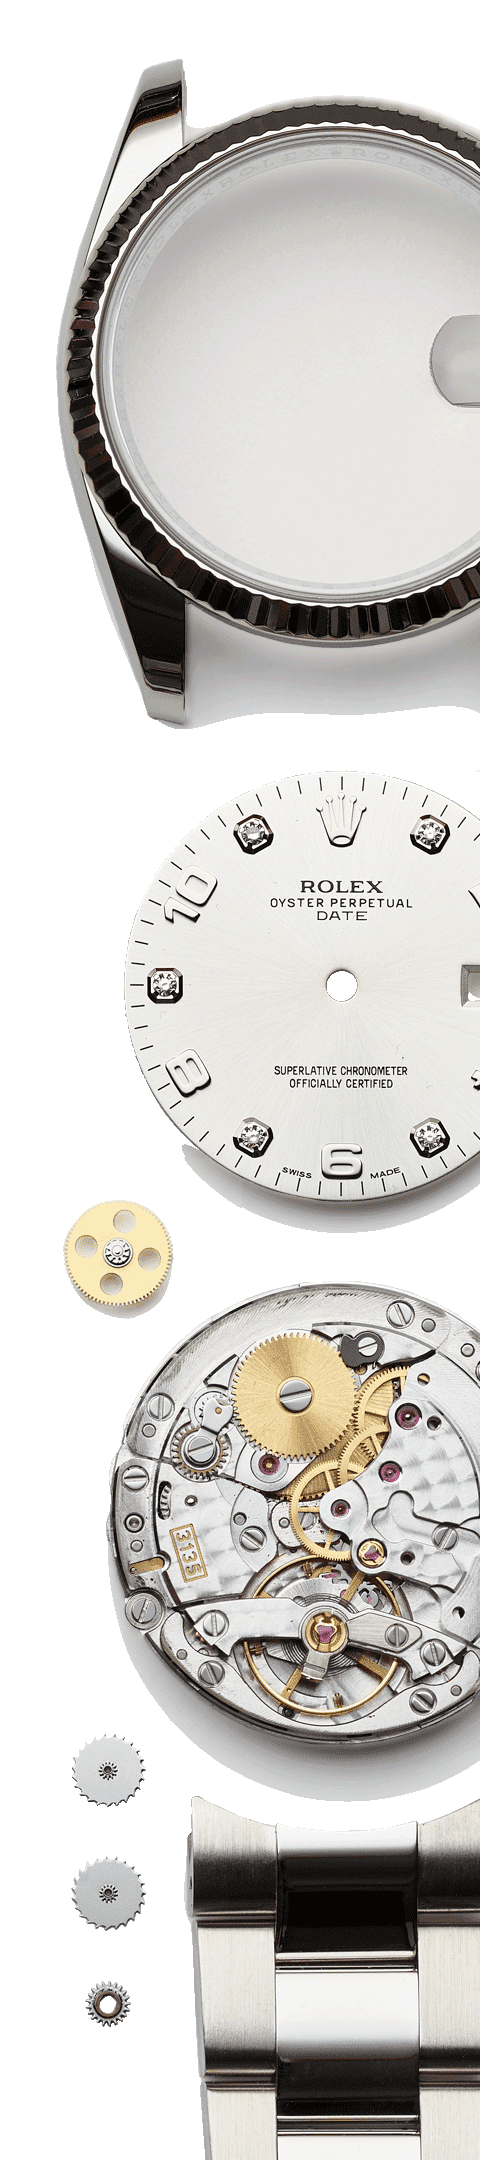 Dismantled Rolex watch and bracelet